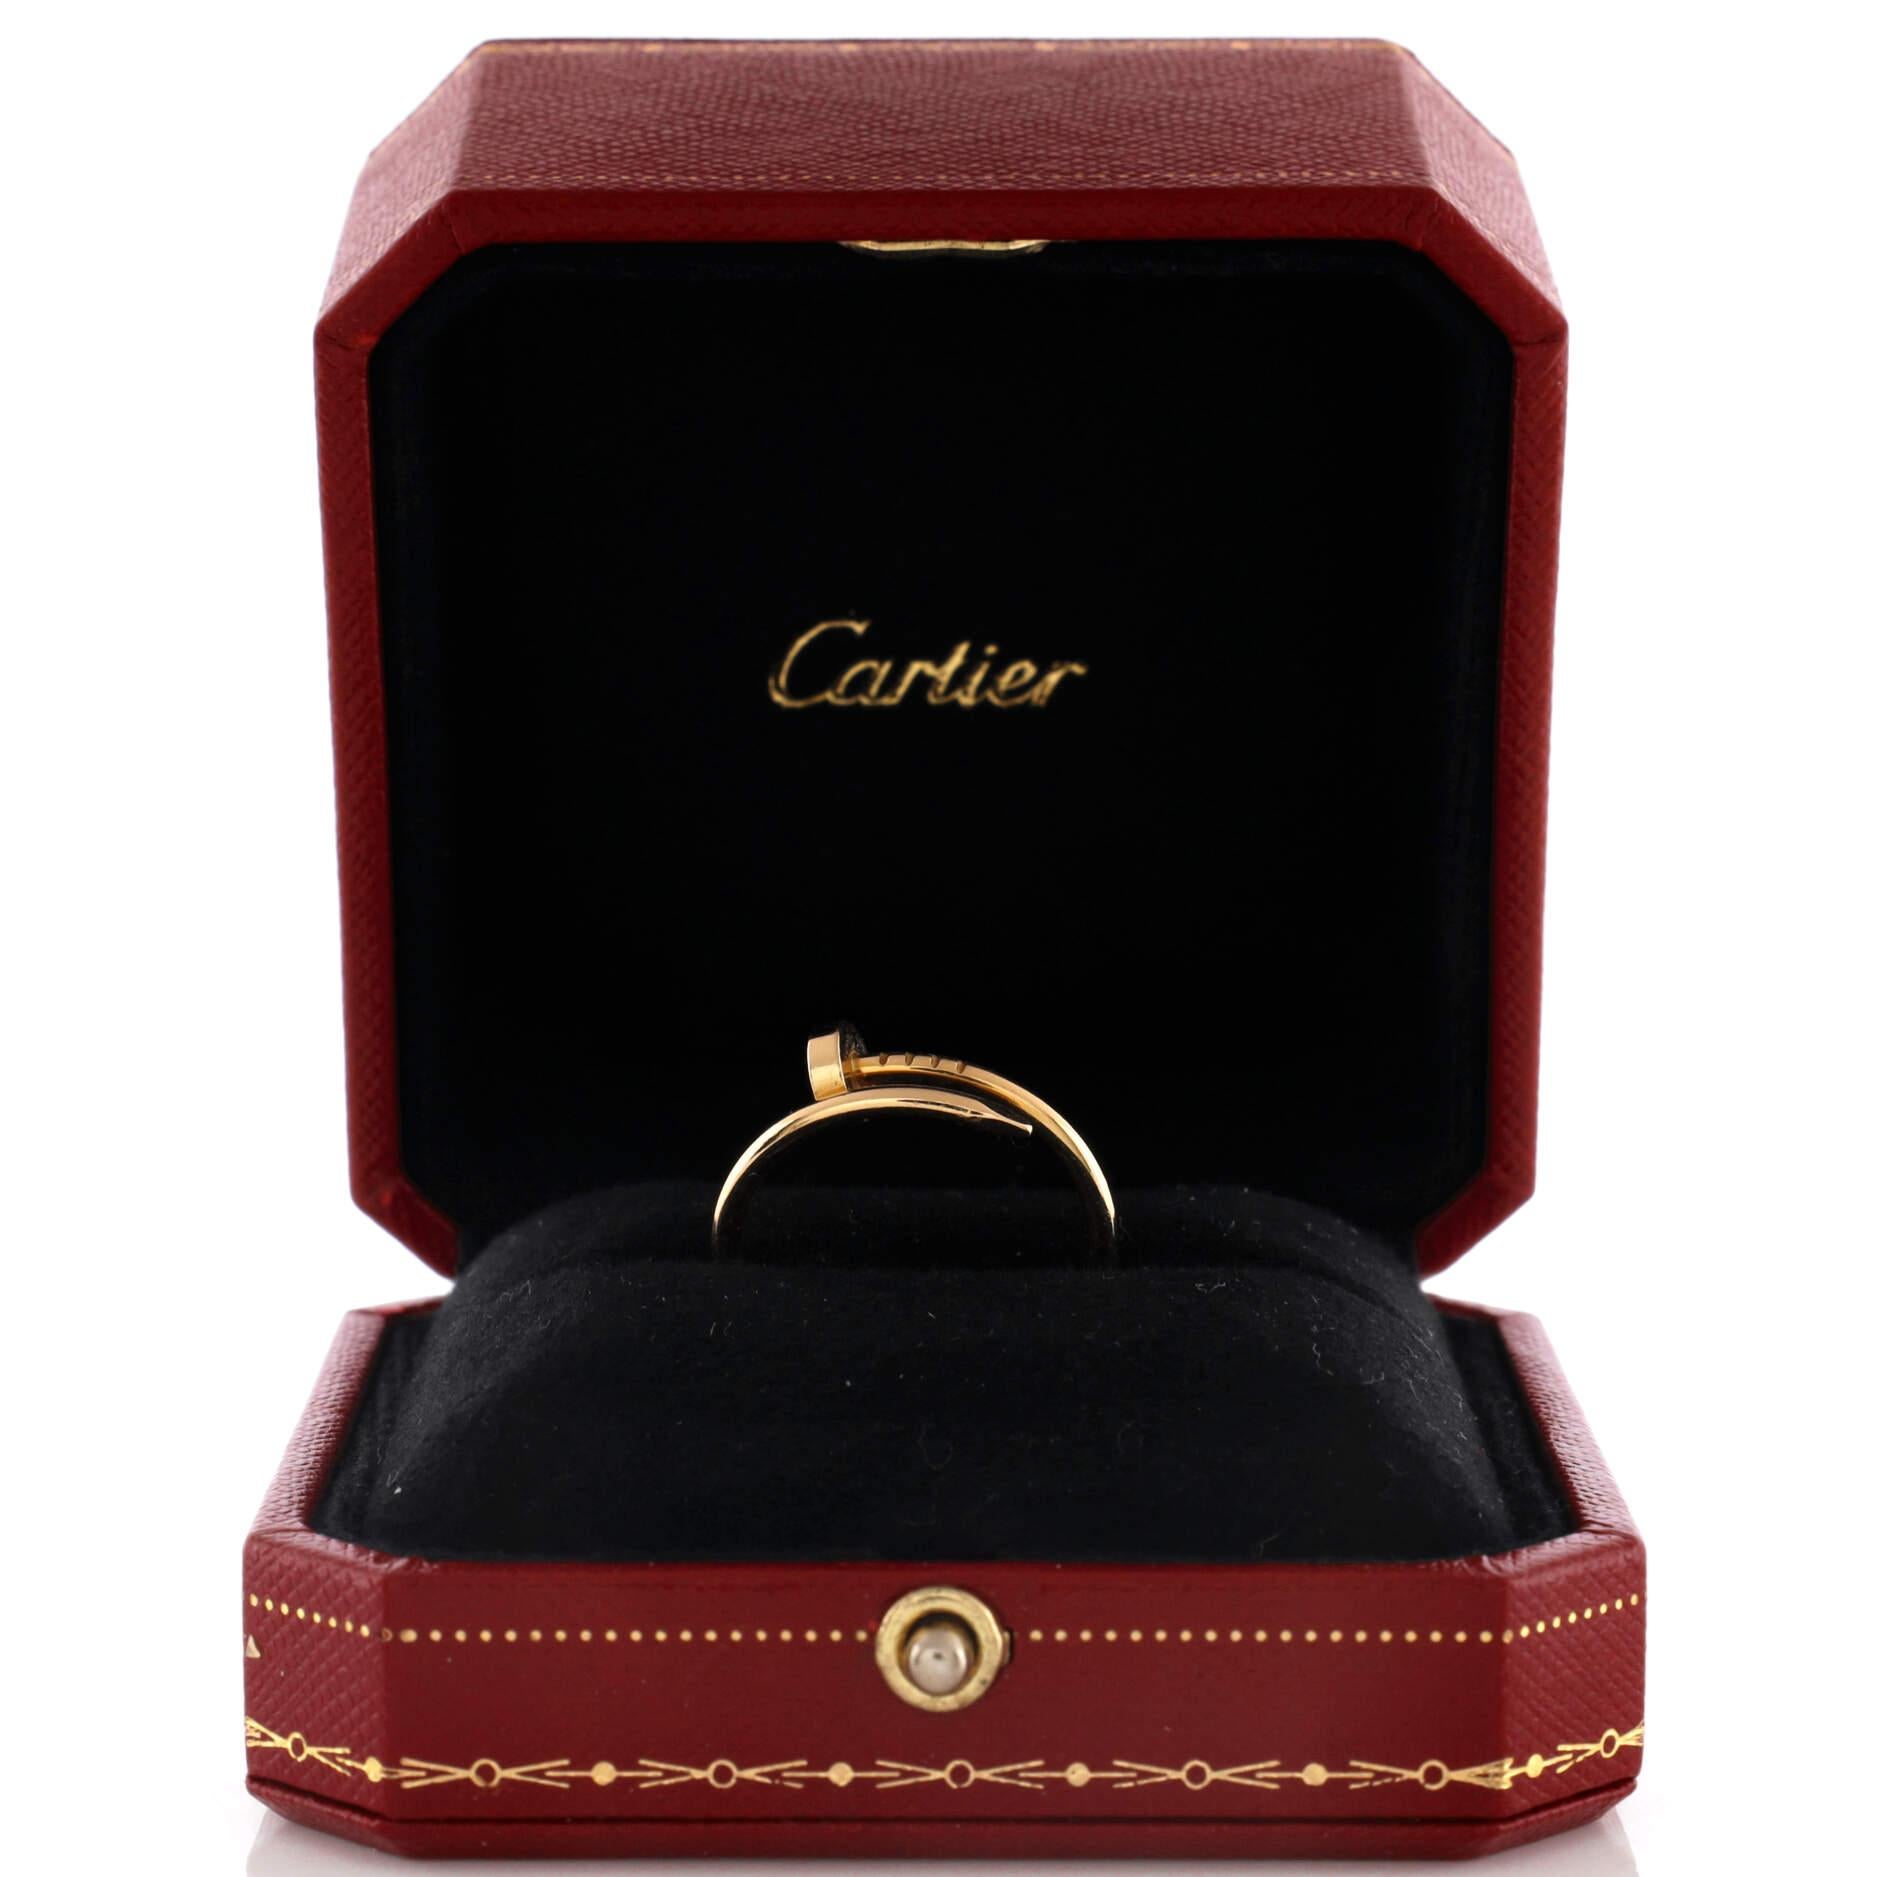 Condition: Great. Minor wear throughout.
Accessories: No Accessories
Measurements: Size: 8.75 - 59, Width: 1.80 mm
Designer: Cartier
Model: Juste un Clou Ring 18K Yellow Gold Small
Exterior Color: Yellow Gold
Item Number: 212076/1